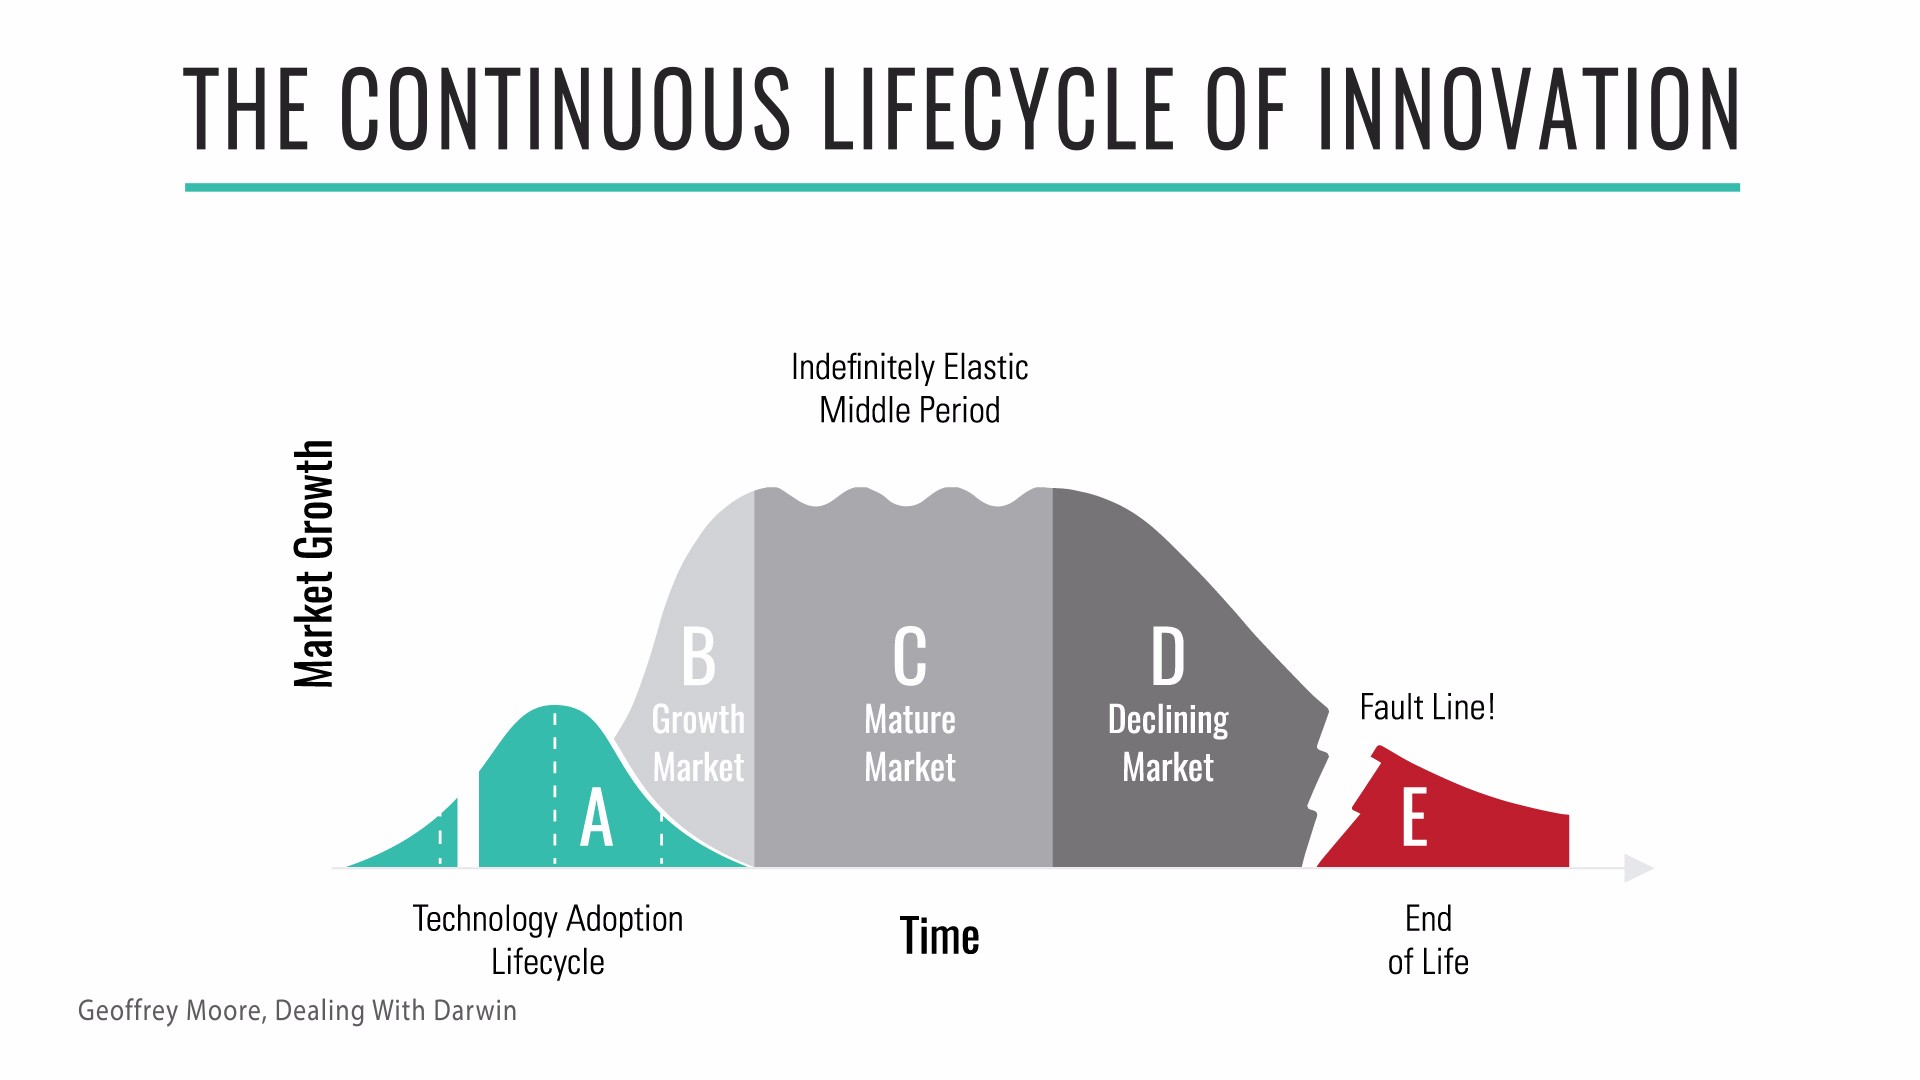 The continuous lifecycle of innovation